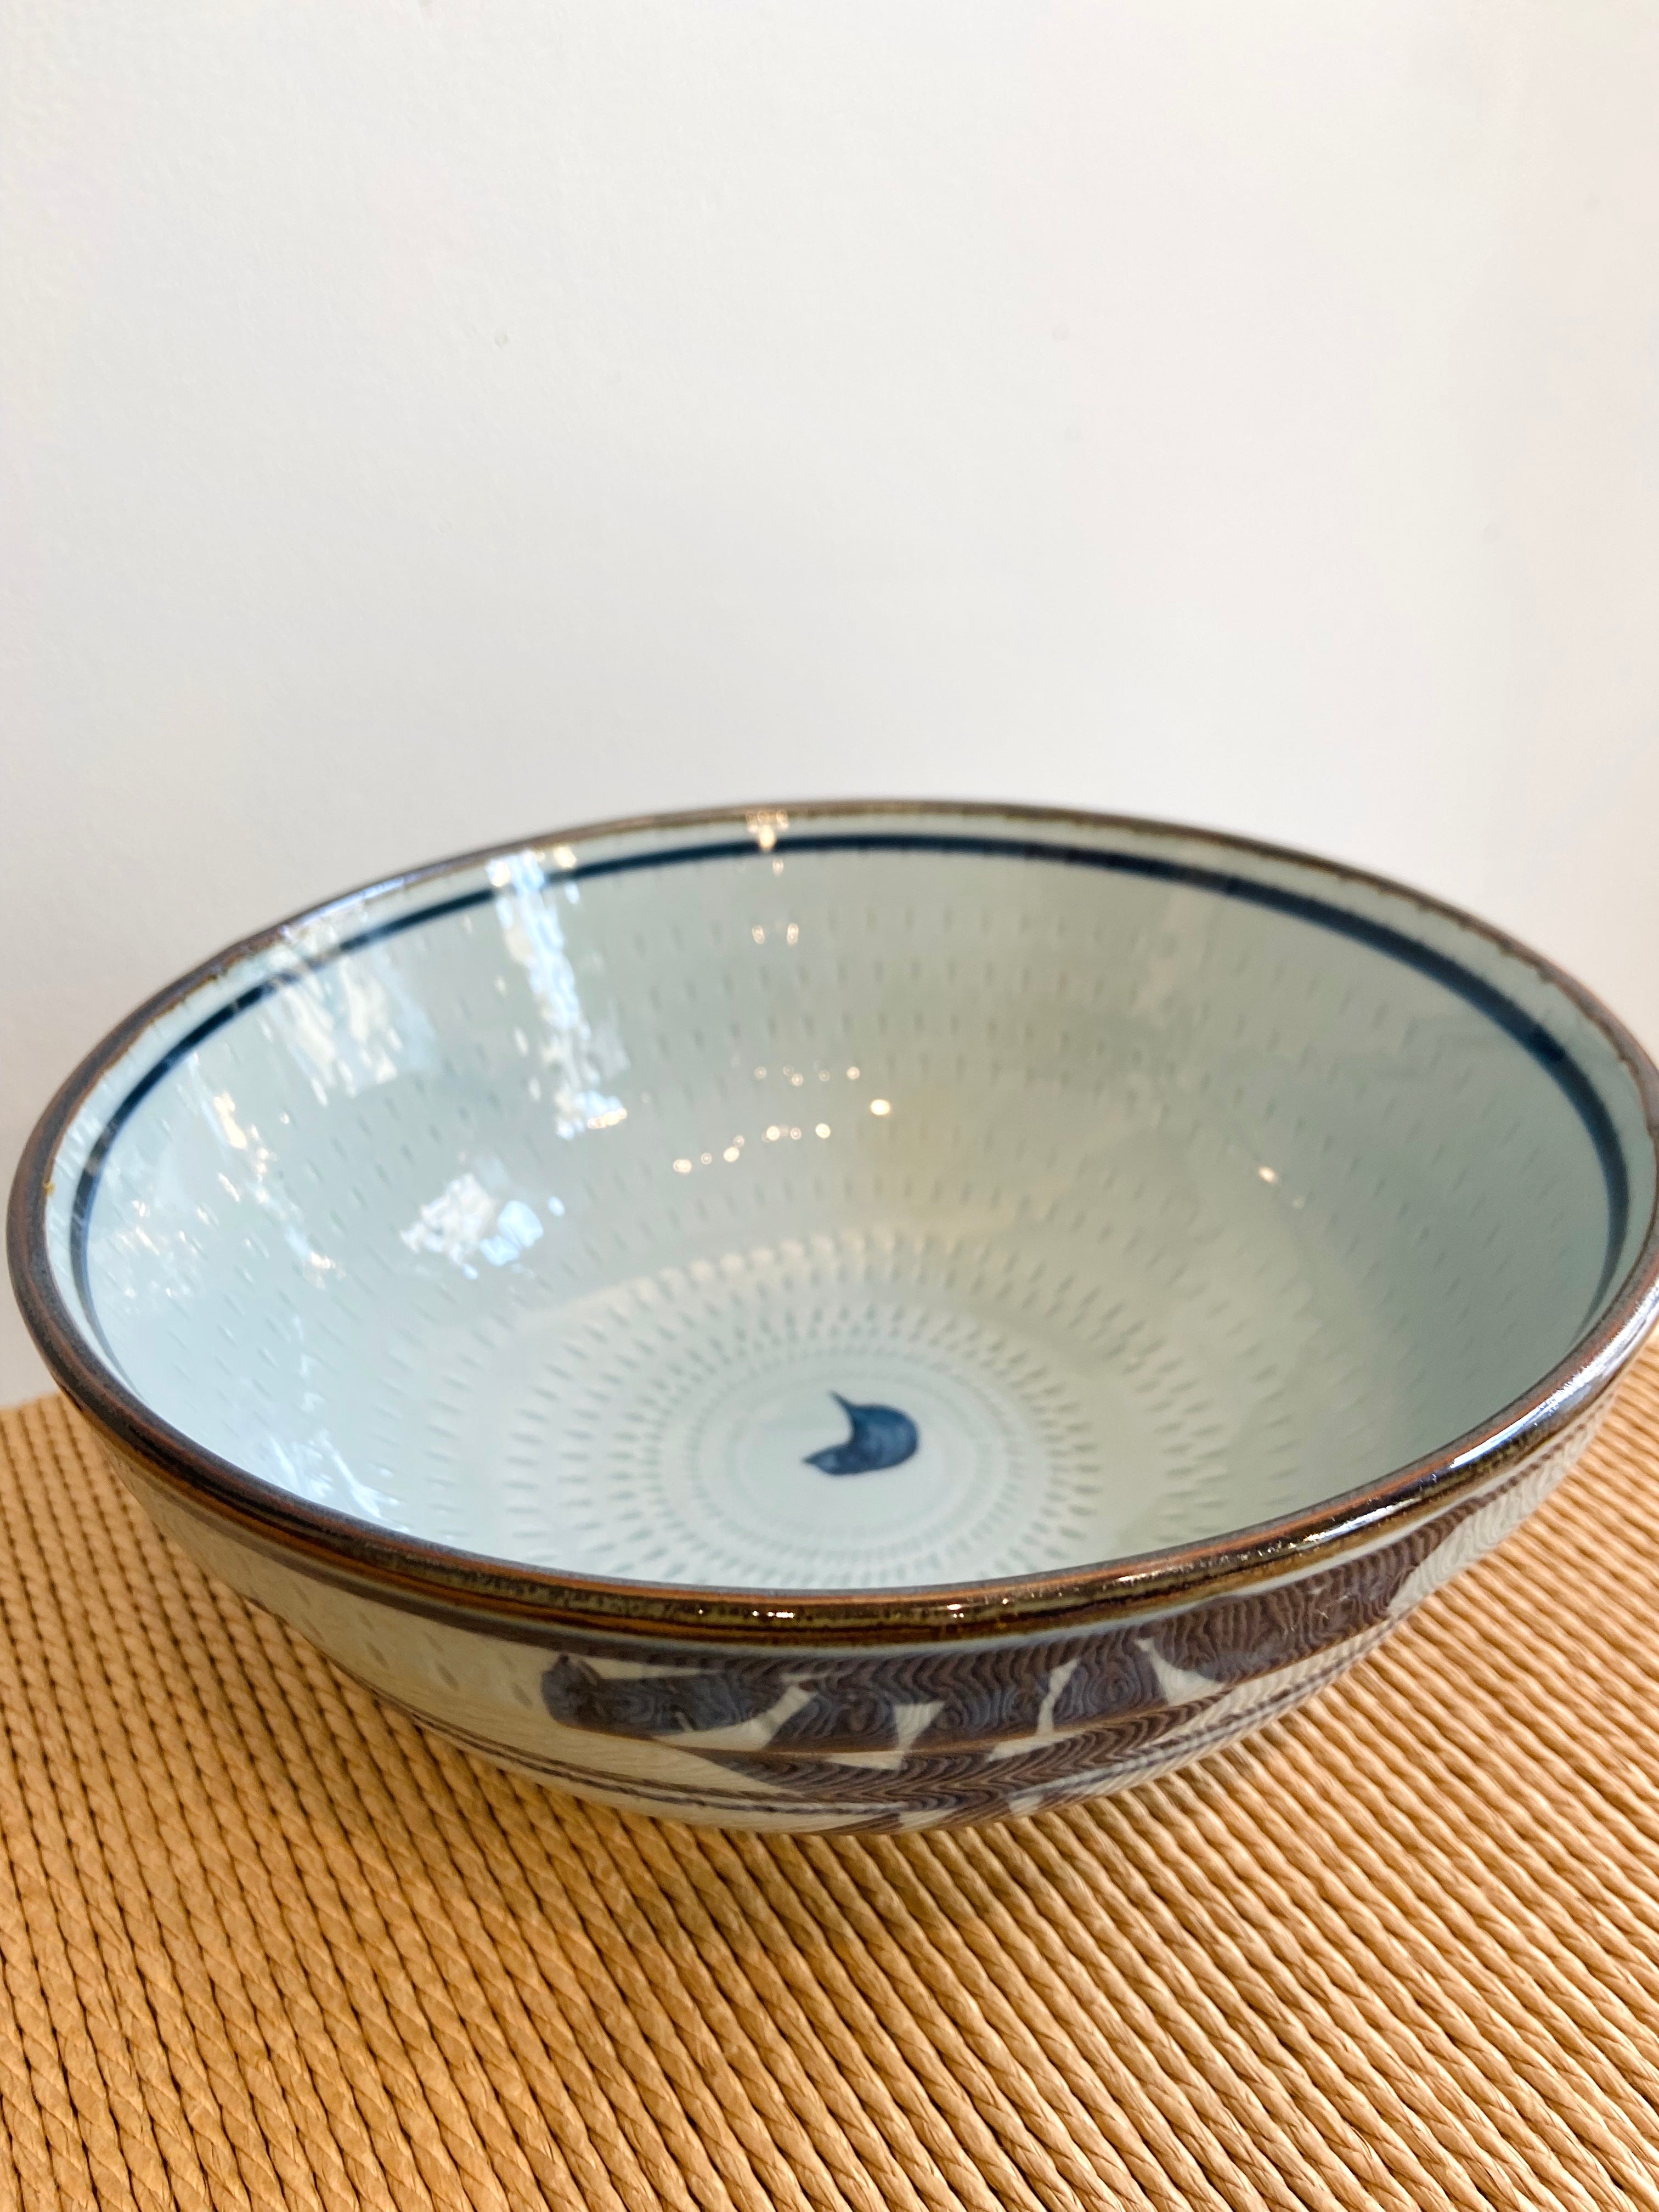 Large hand-painted ramen bowl with Japanese motifs